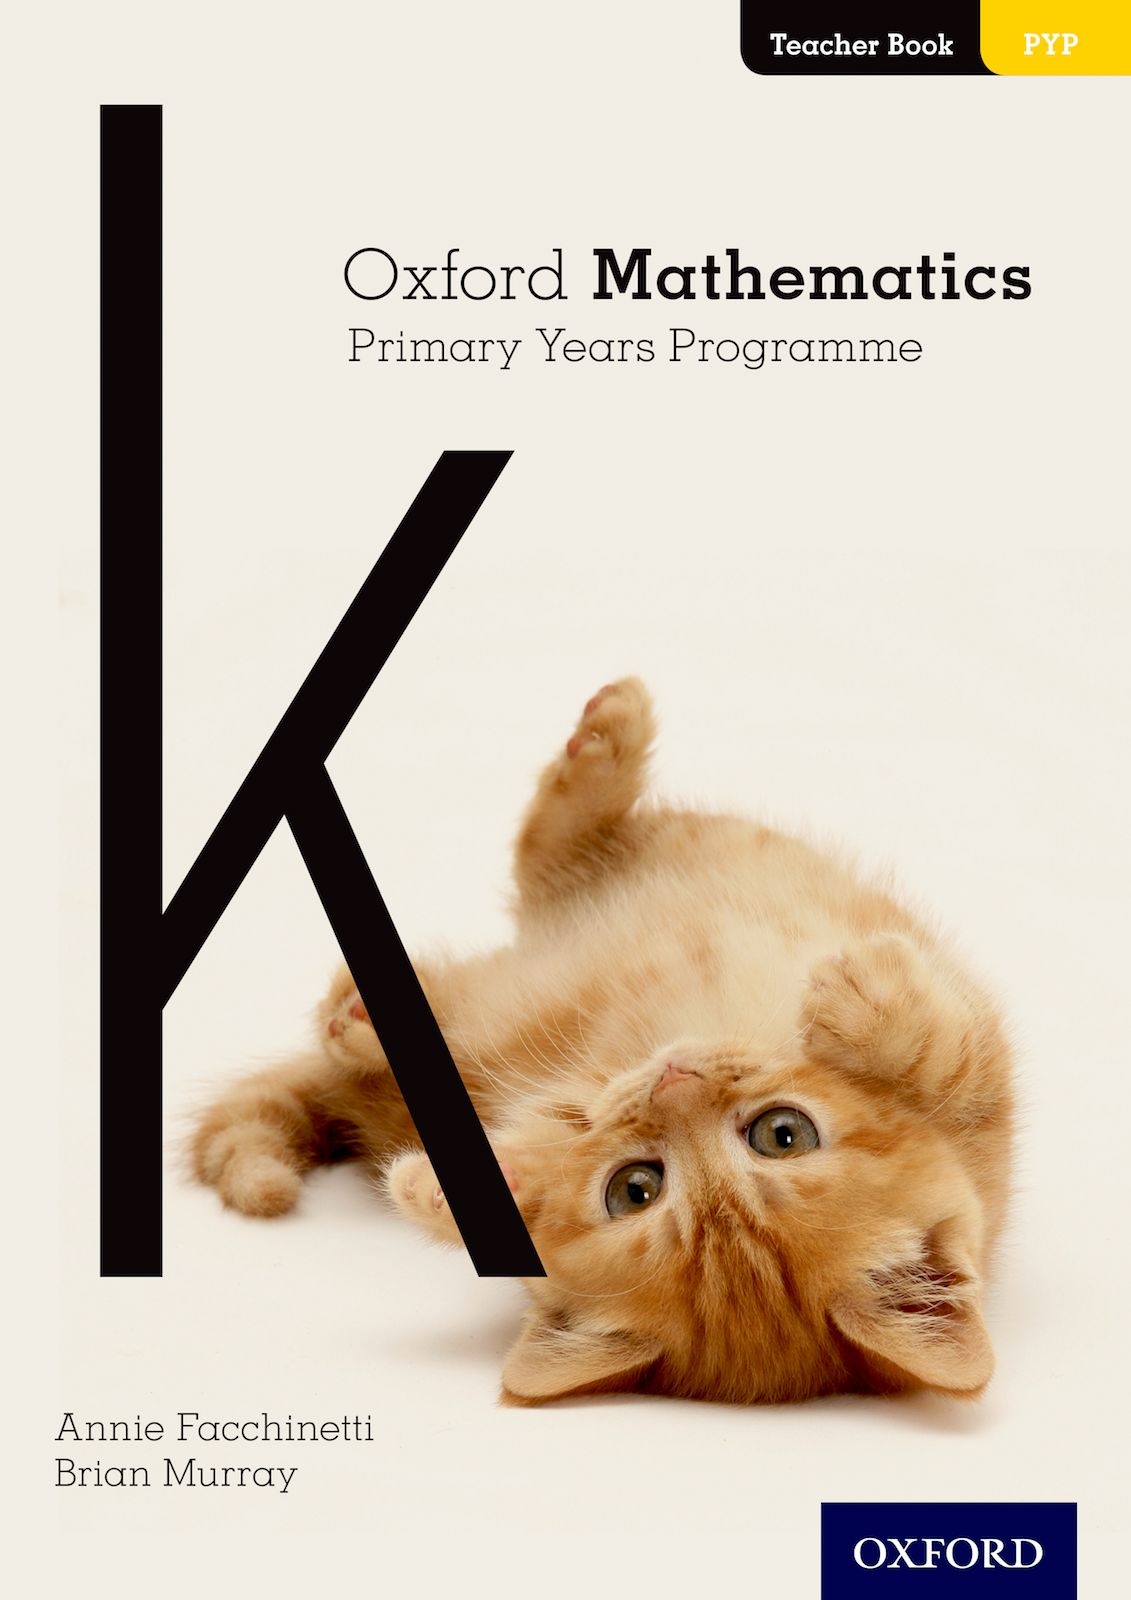 Featured image for “Oxford Mathematics Primary Years Programme Teacher Book K”